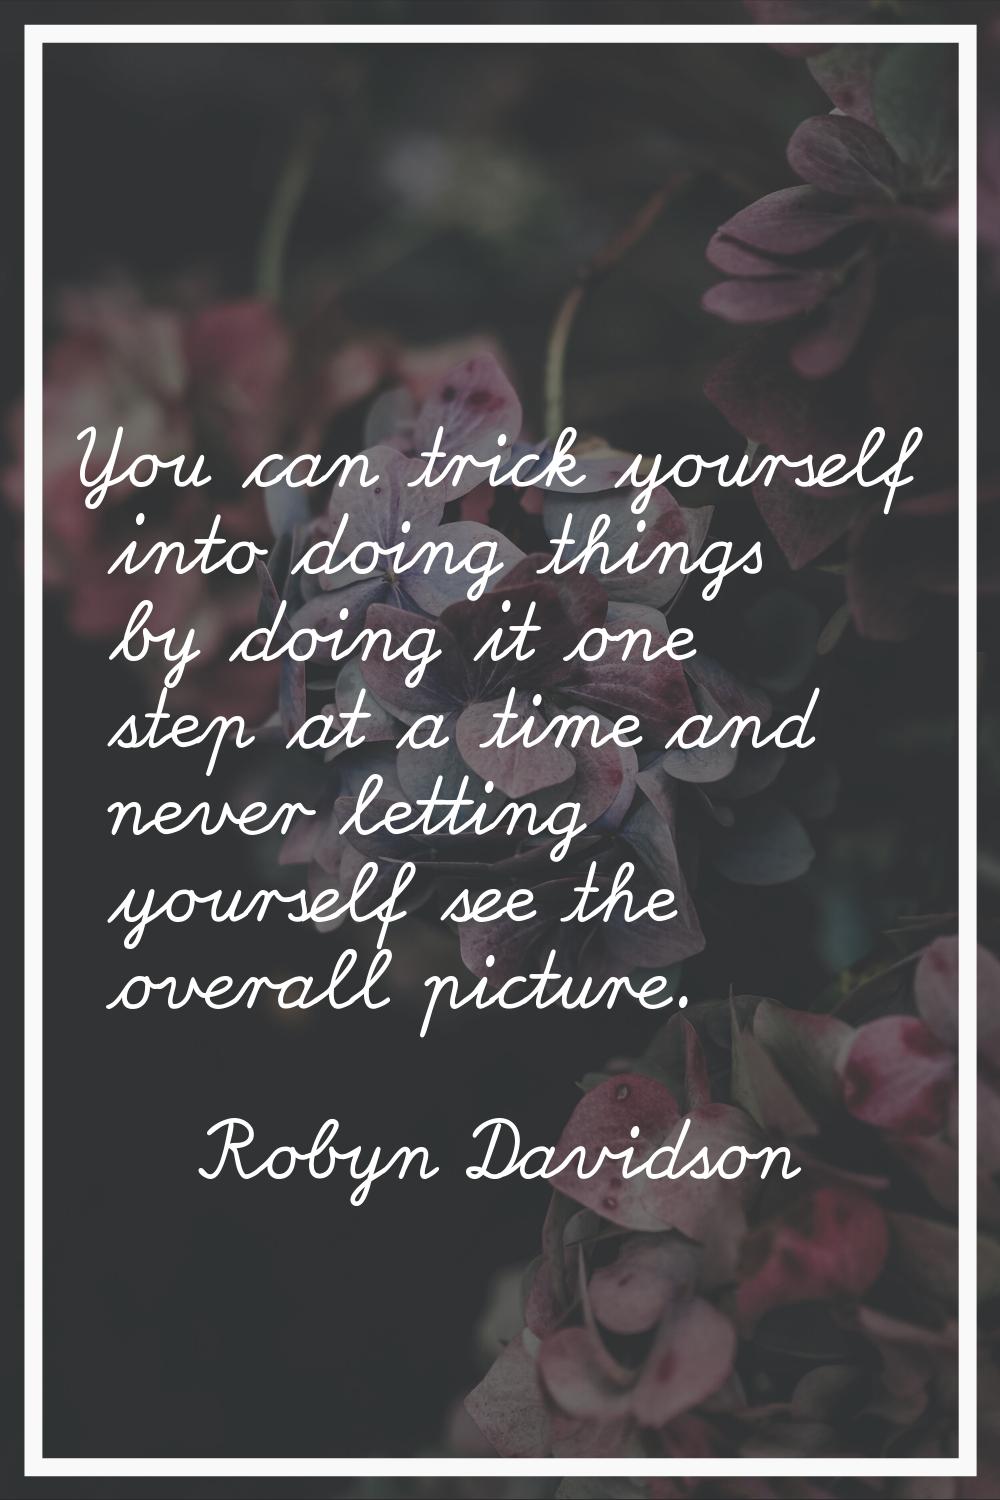 You can trick yourself into doing things by doing it one step at a time and never letting yourself 